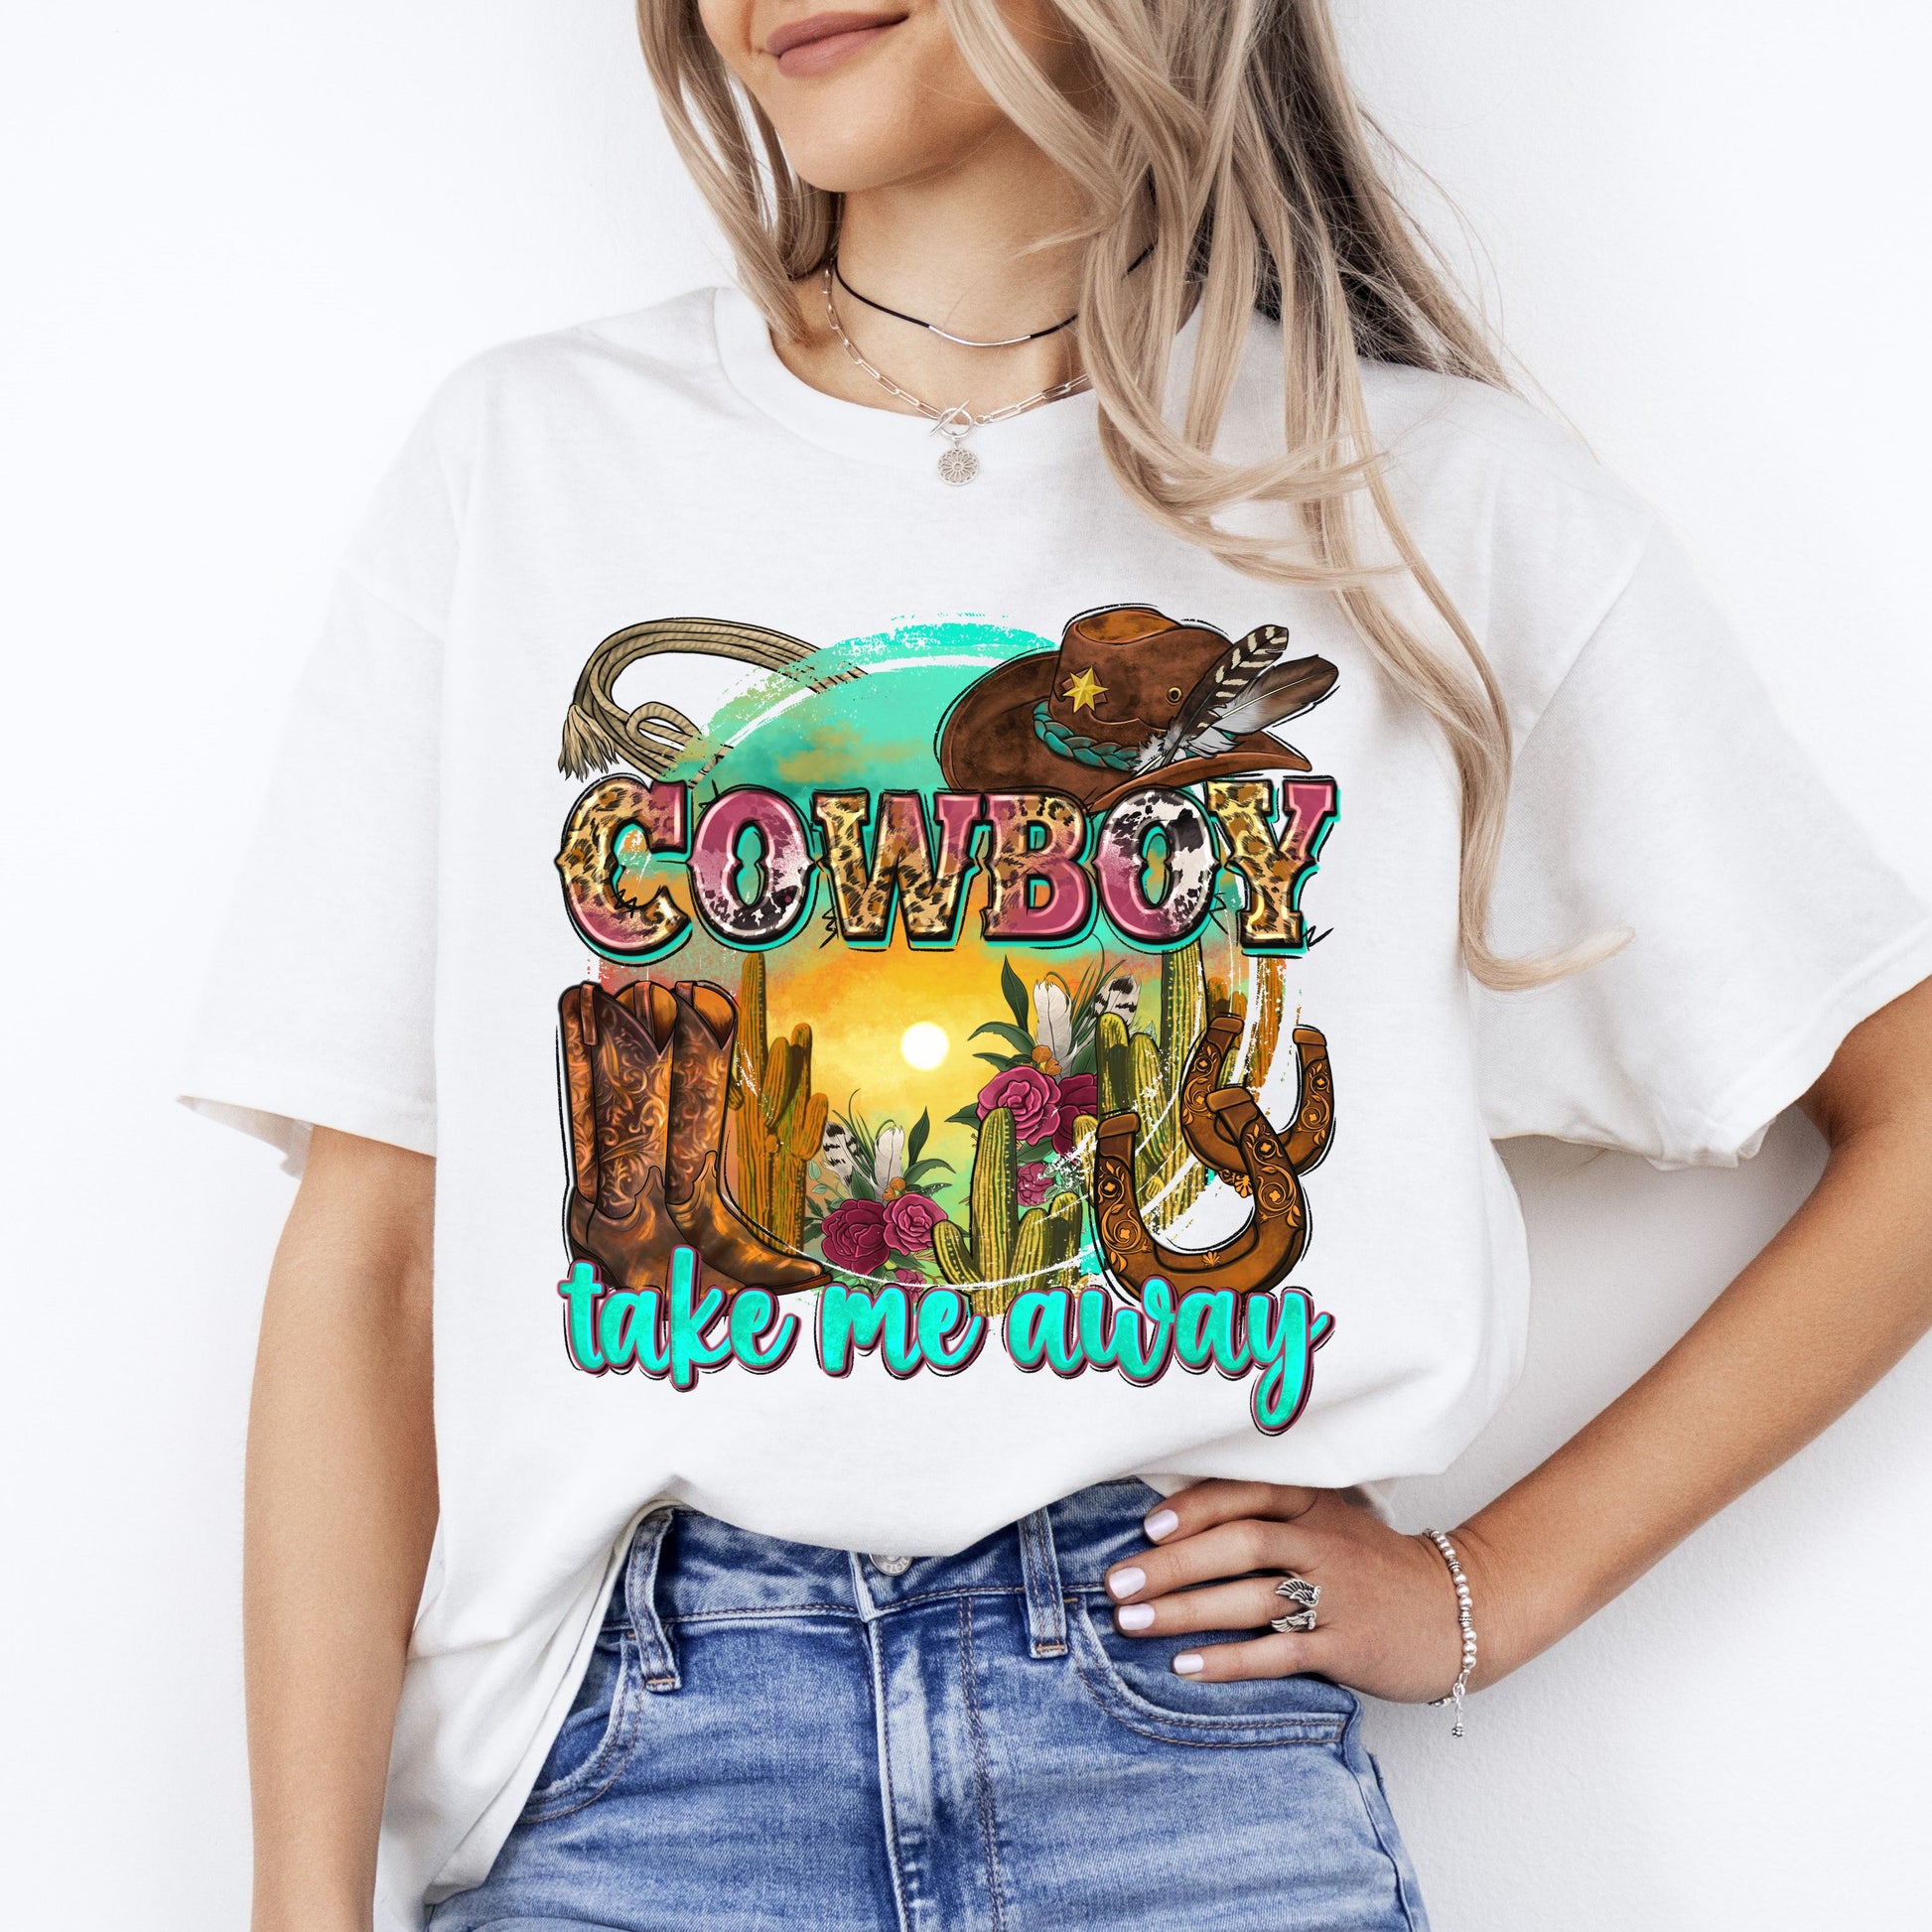 Cowboy take me away T-Shirt Texas Western boots cactus hat Unisex tee White Sand Sport Grey-White-Family-Gift-Planet